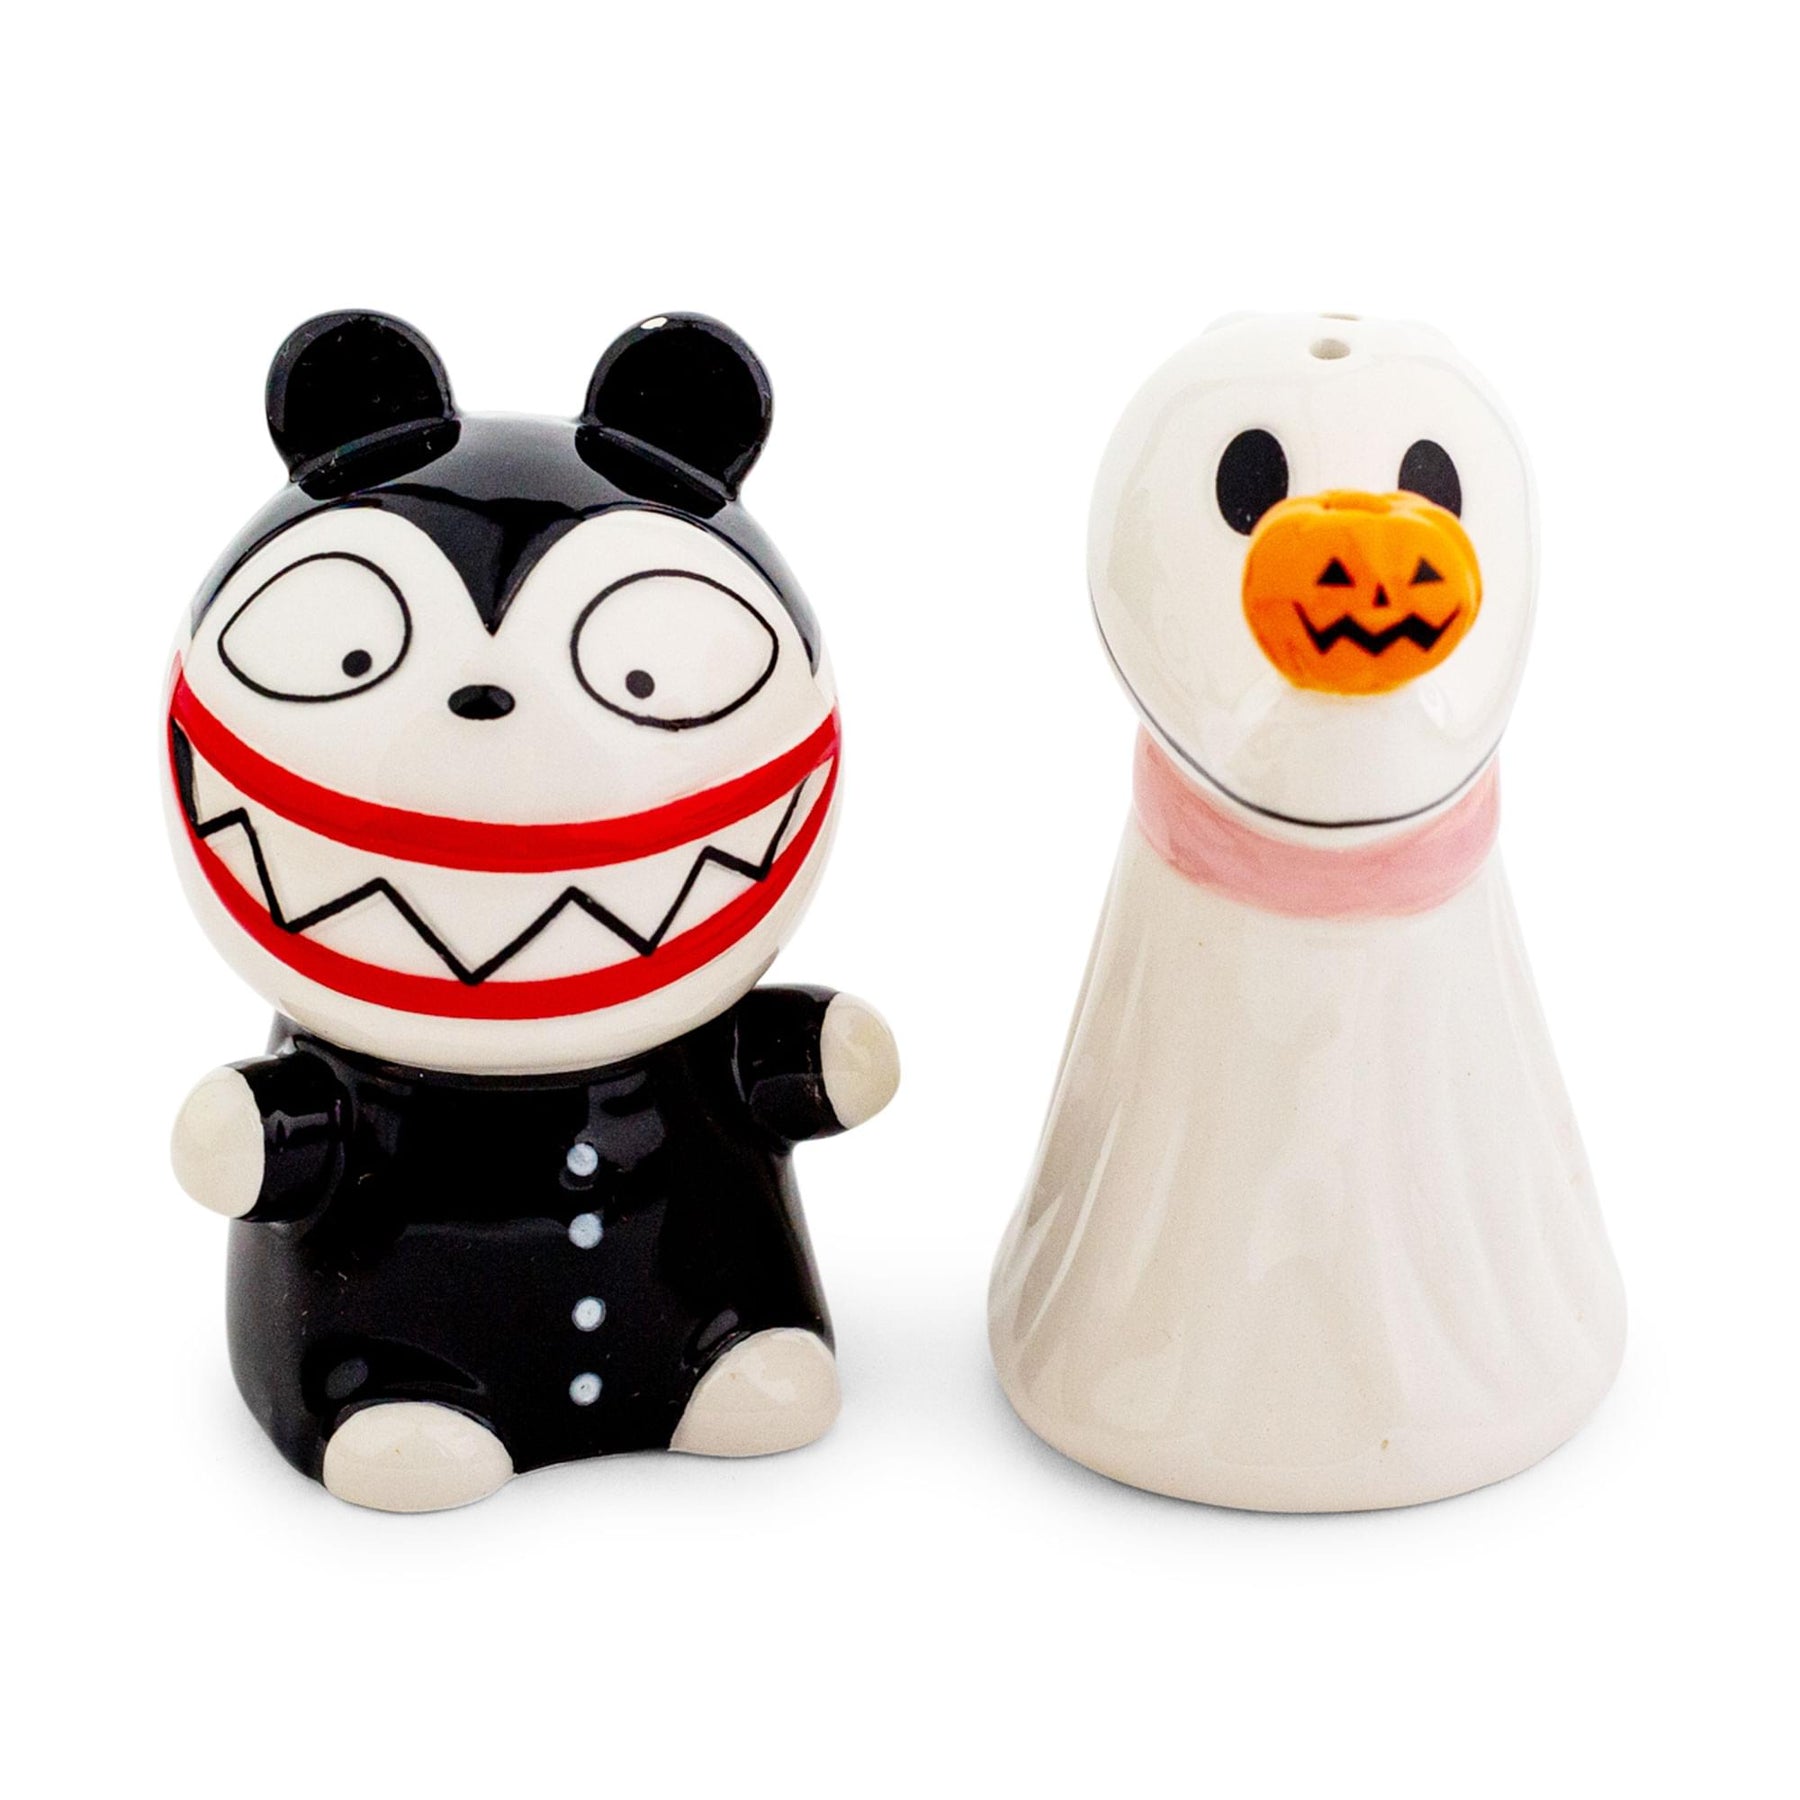 Disney The Nightmare Before Christmas Zero and Teddy Salt and Pepper Shaker Set